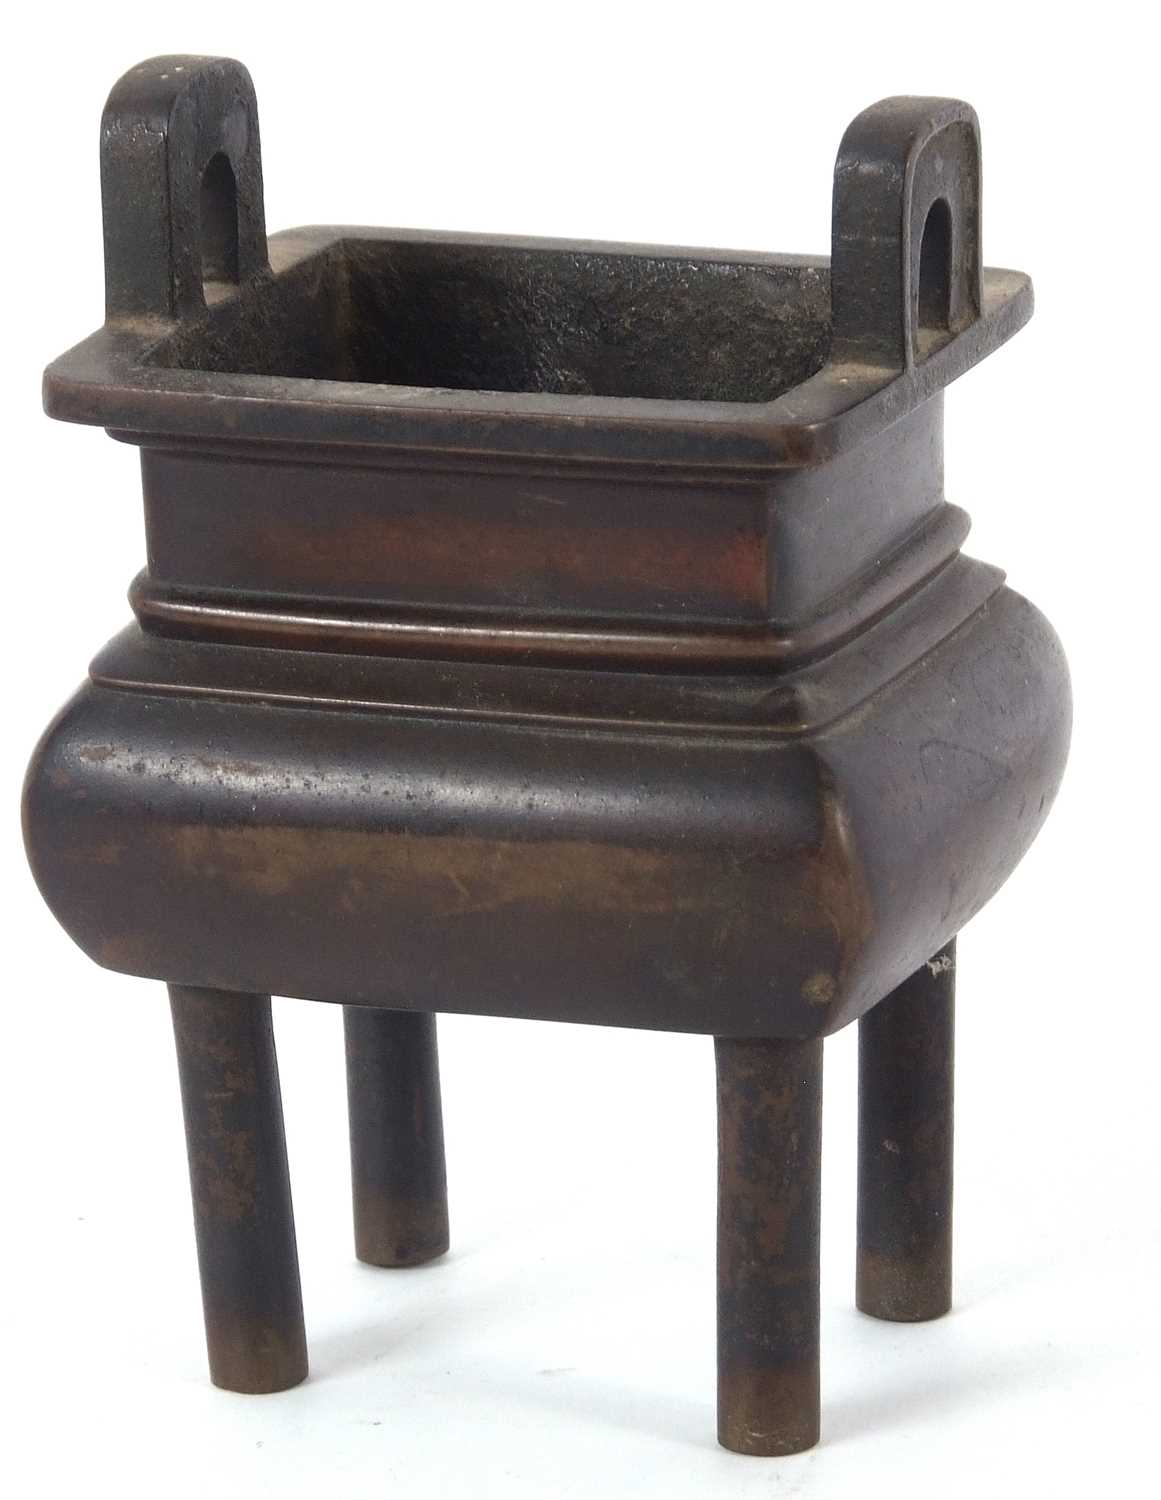 Incense burner of Archaistic form mounted on four legs, 16cm high - Image 12 of 15